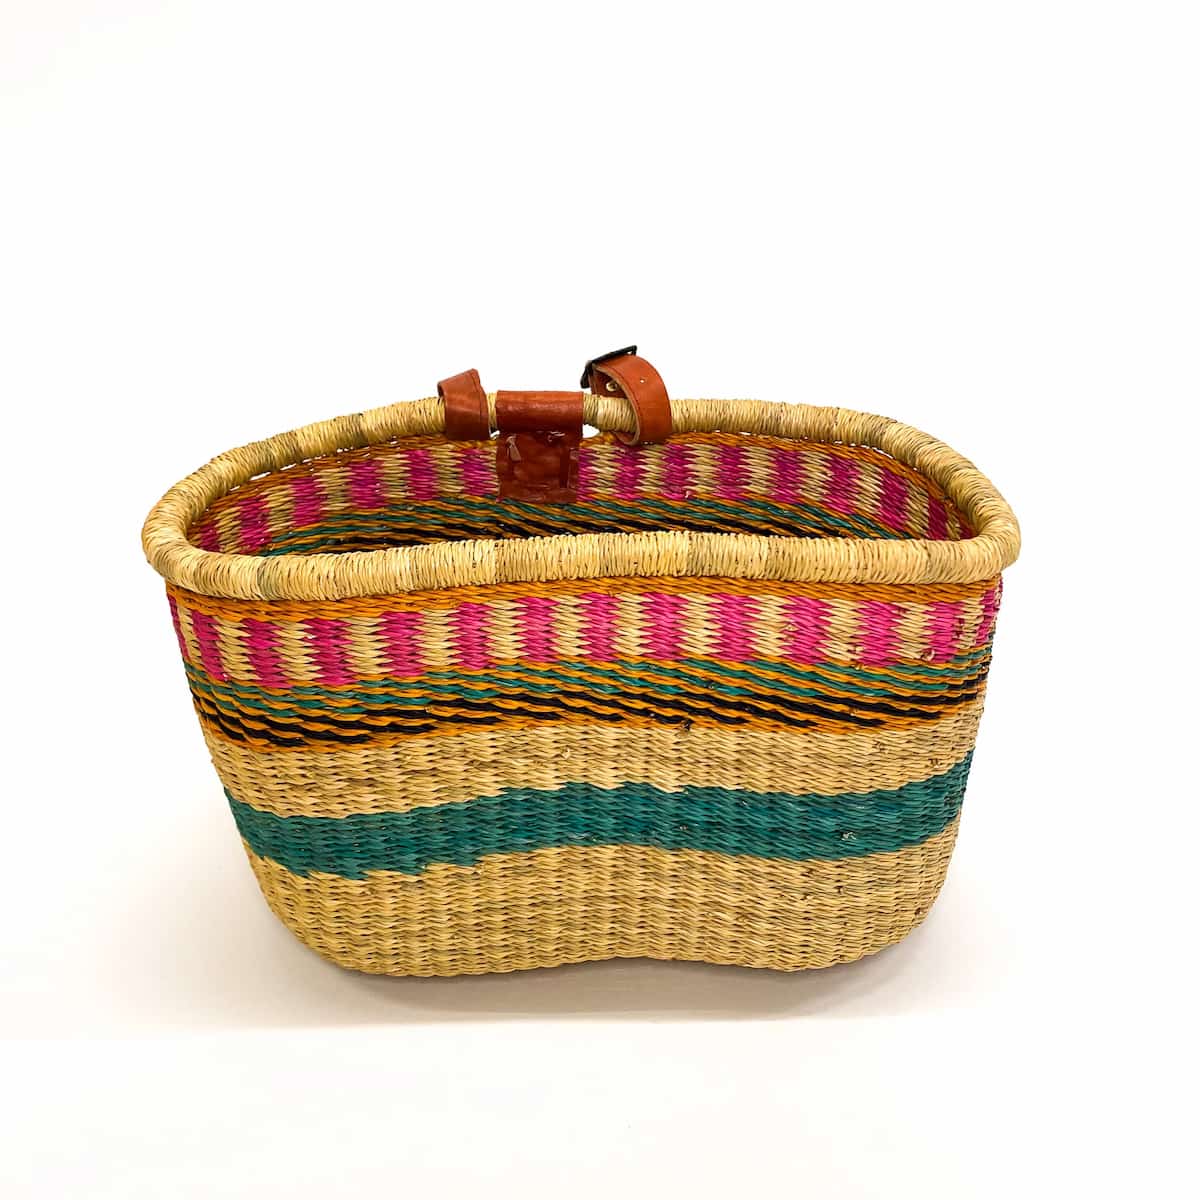 Frafra Pink and Turquoise Bicycle Basket